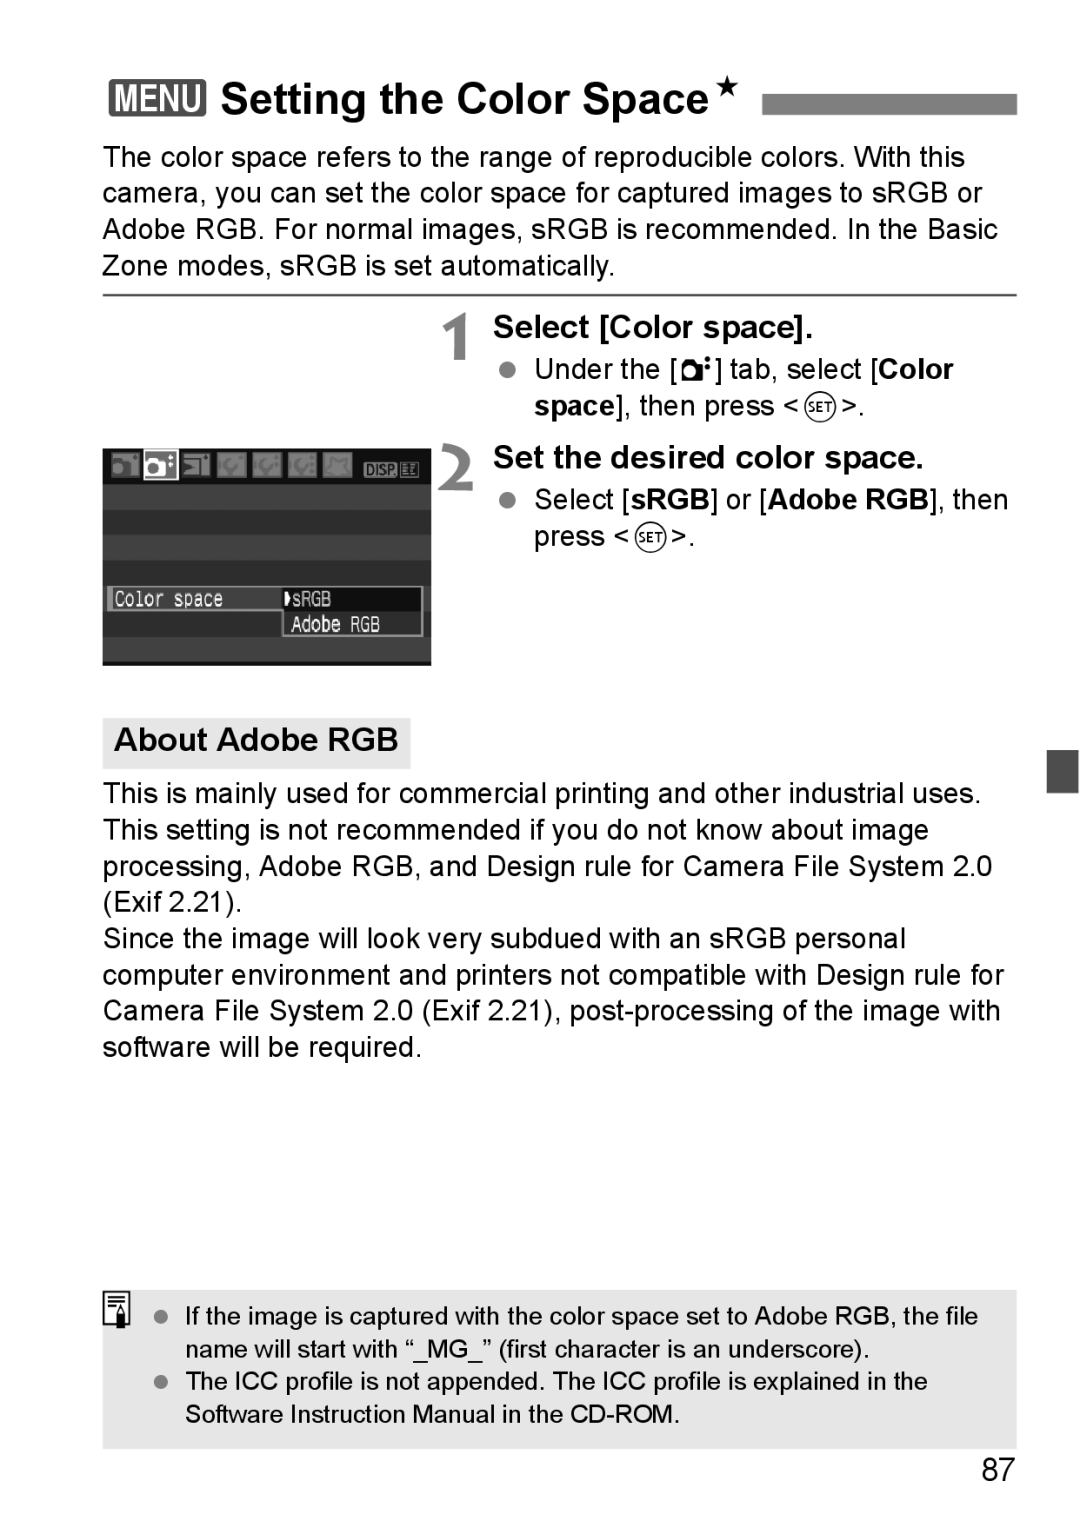 Canon EOS 450D instruction manual 3Setting the Color SpaceN, Select Color space, About Adobe RGB 